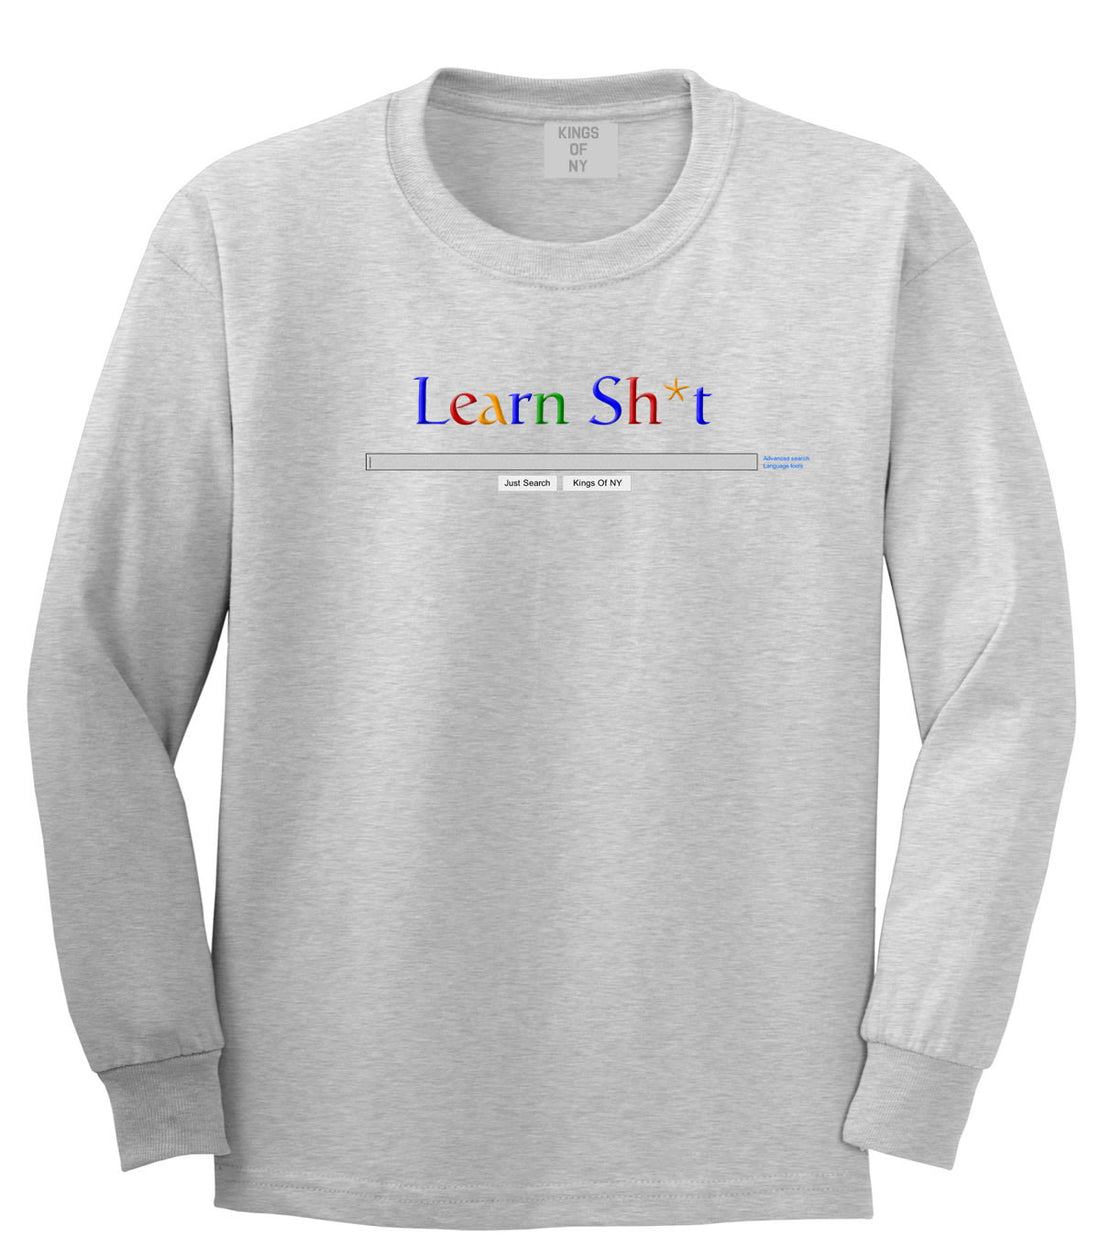 Learn Shit Search Long Sleeve T-Shirt in Grey By Kings Of NY